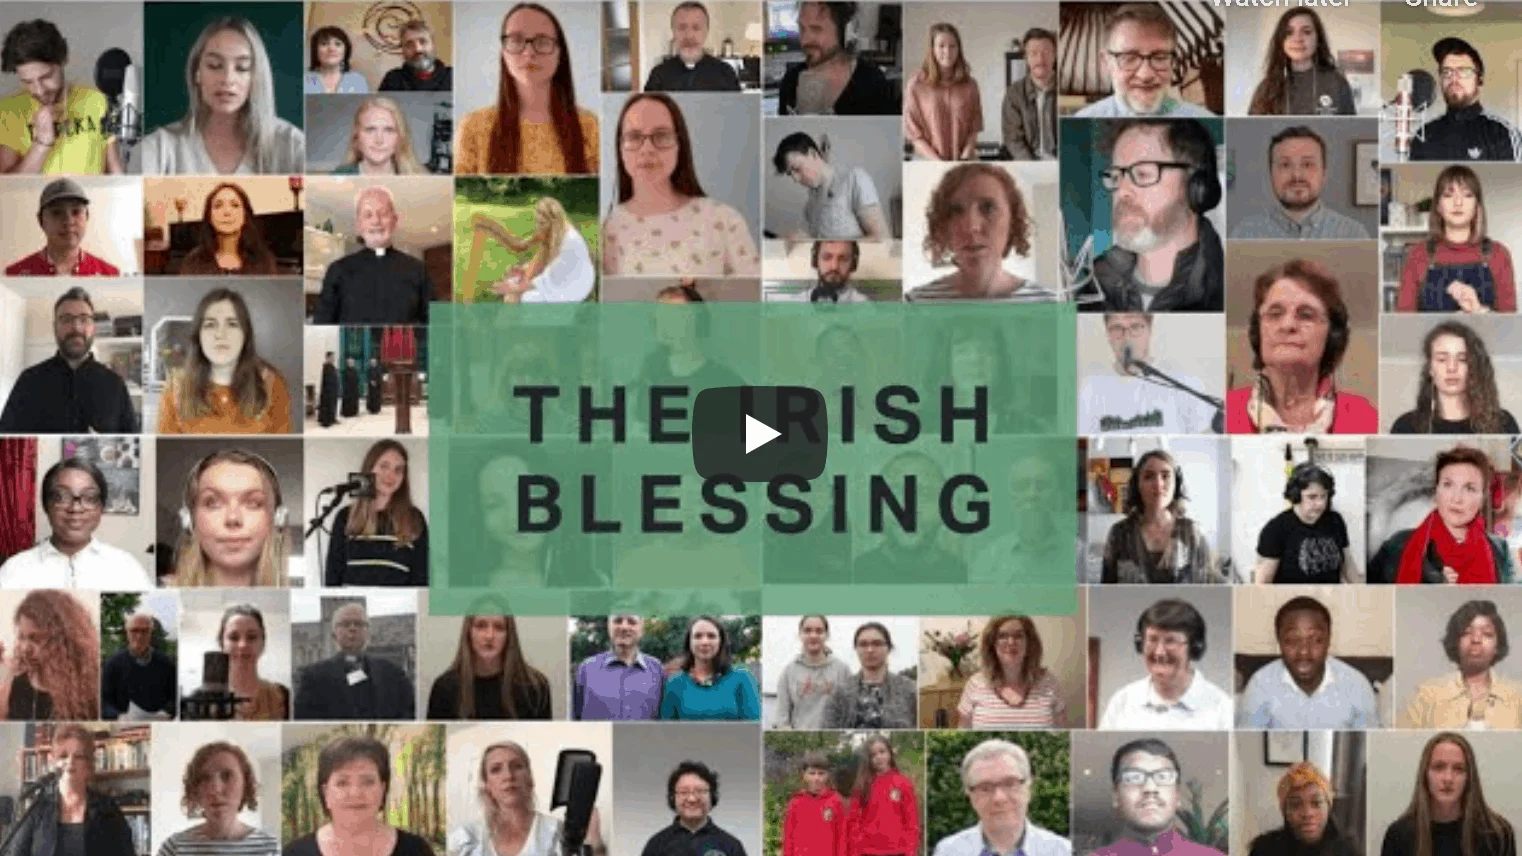 Irish blessing over 300 churches accross every county in Ireland